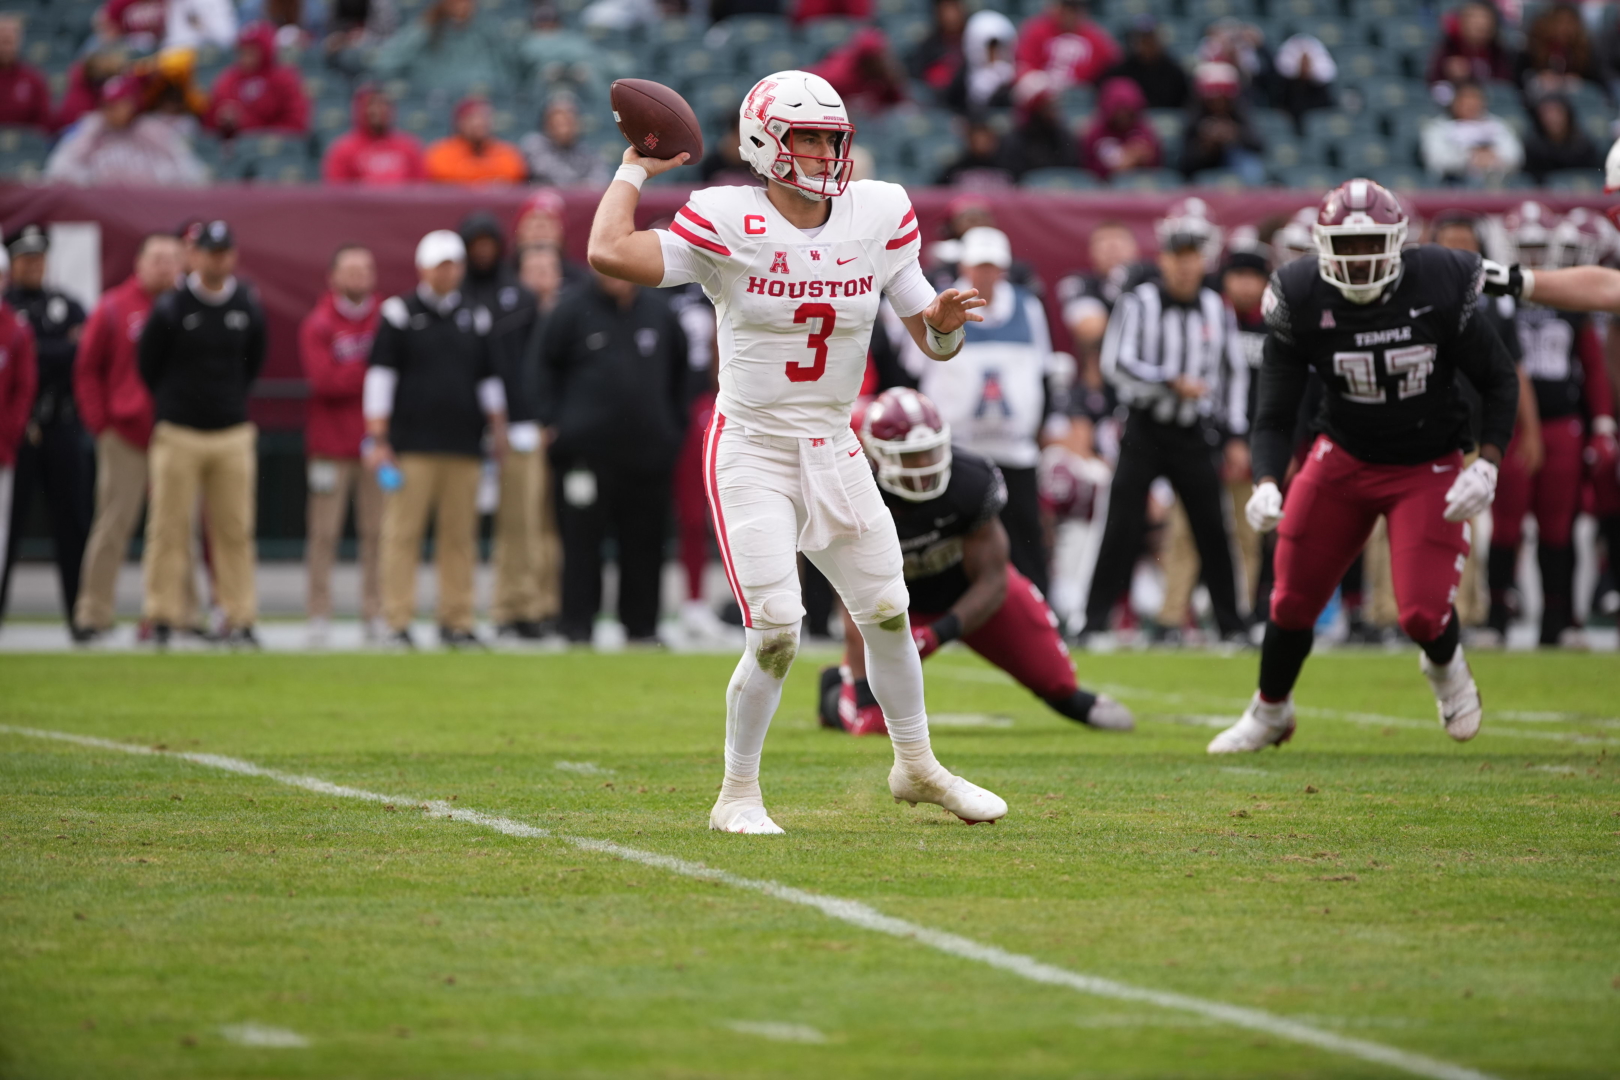 Junior quarterback Clayton Tune has helped lead UH football back to the AAC title game for the first time since 2015. | Courtesy of UH athletics